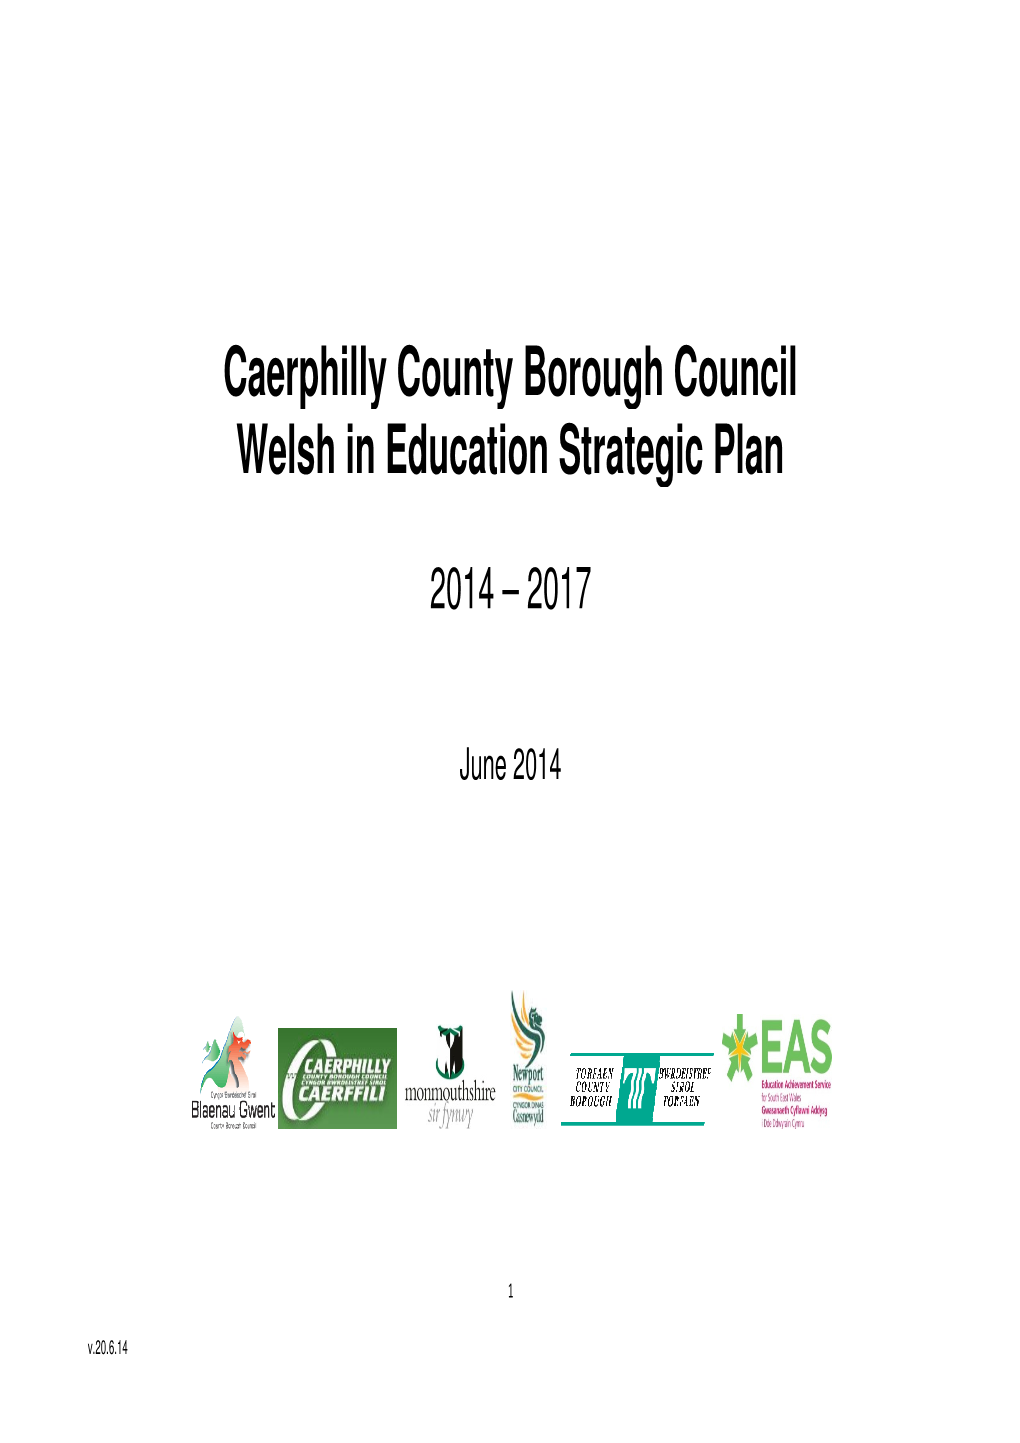 Caerphilly Welsh in Education Caerphilly County Borough Council Welsh in Education Strategic Plan Rough Council Trategic Plan